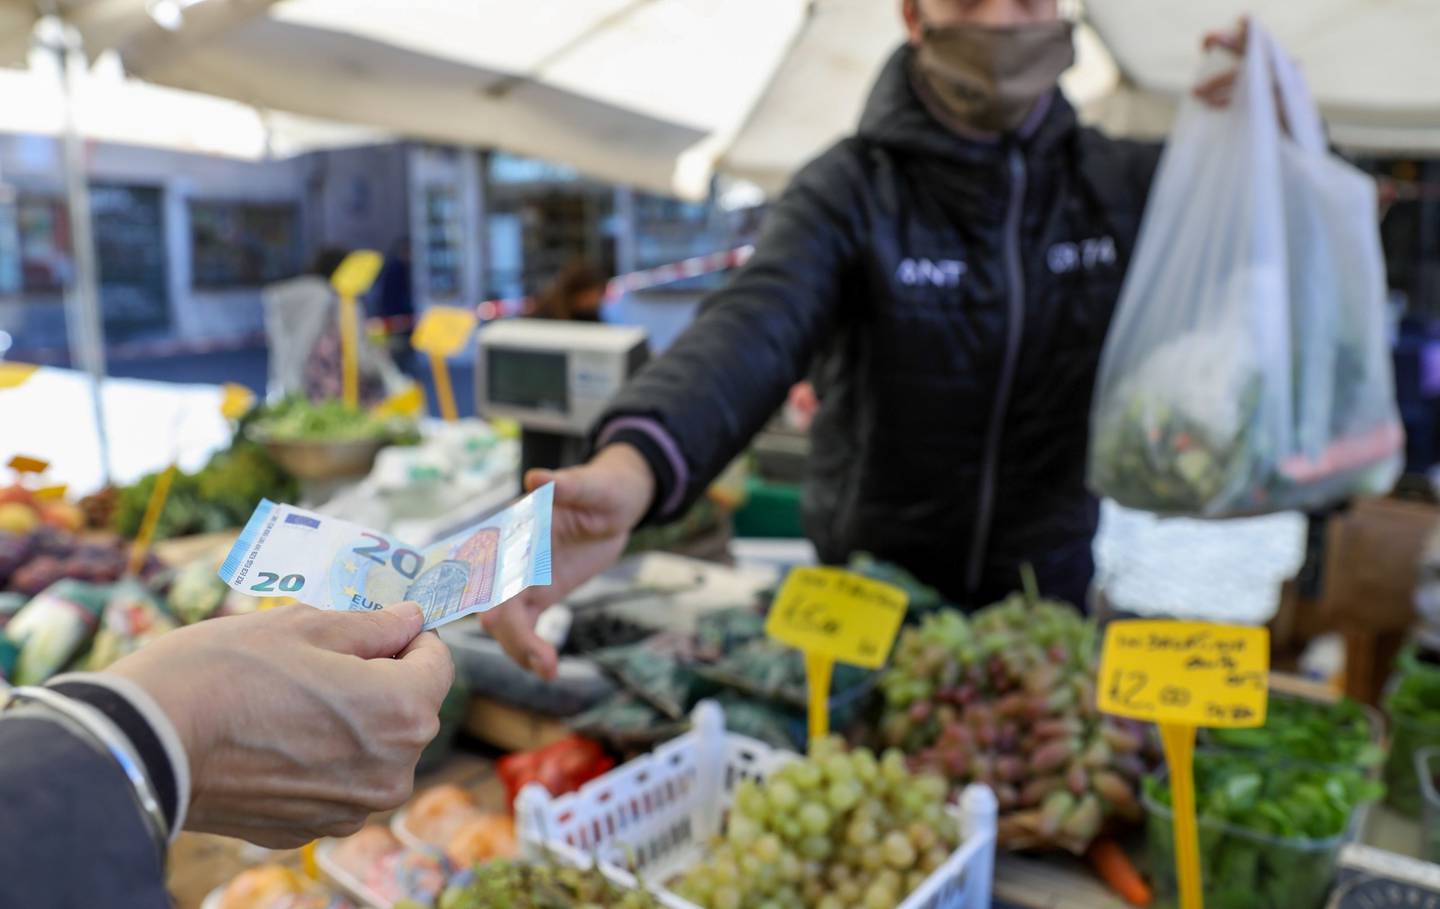 A customer hands a 20 Euro currency banknote to a vendor at a stall selling fruit and vegetables in Rome, Italy, on Thursday, Oct. 8, 2020. Italy's government reinforced measures to curb the coronavirus pandemic, including decreeing that protective masks must be worn outdoors across the country. Photographer: Alessia Pierdomenico/Bloomberg